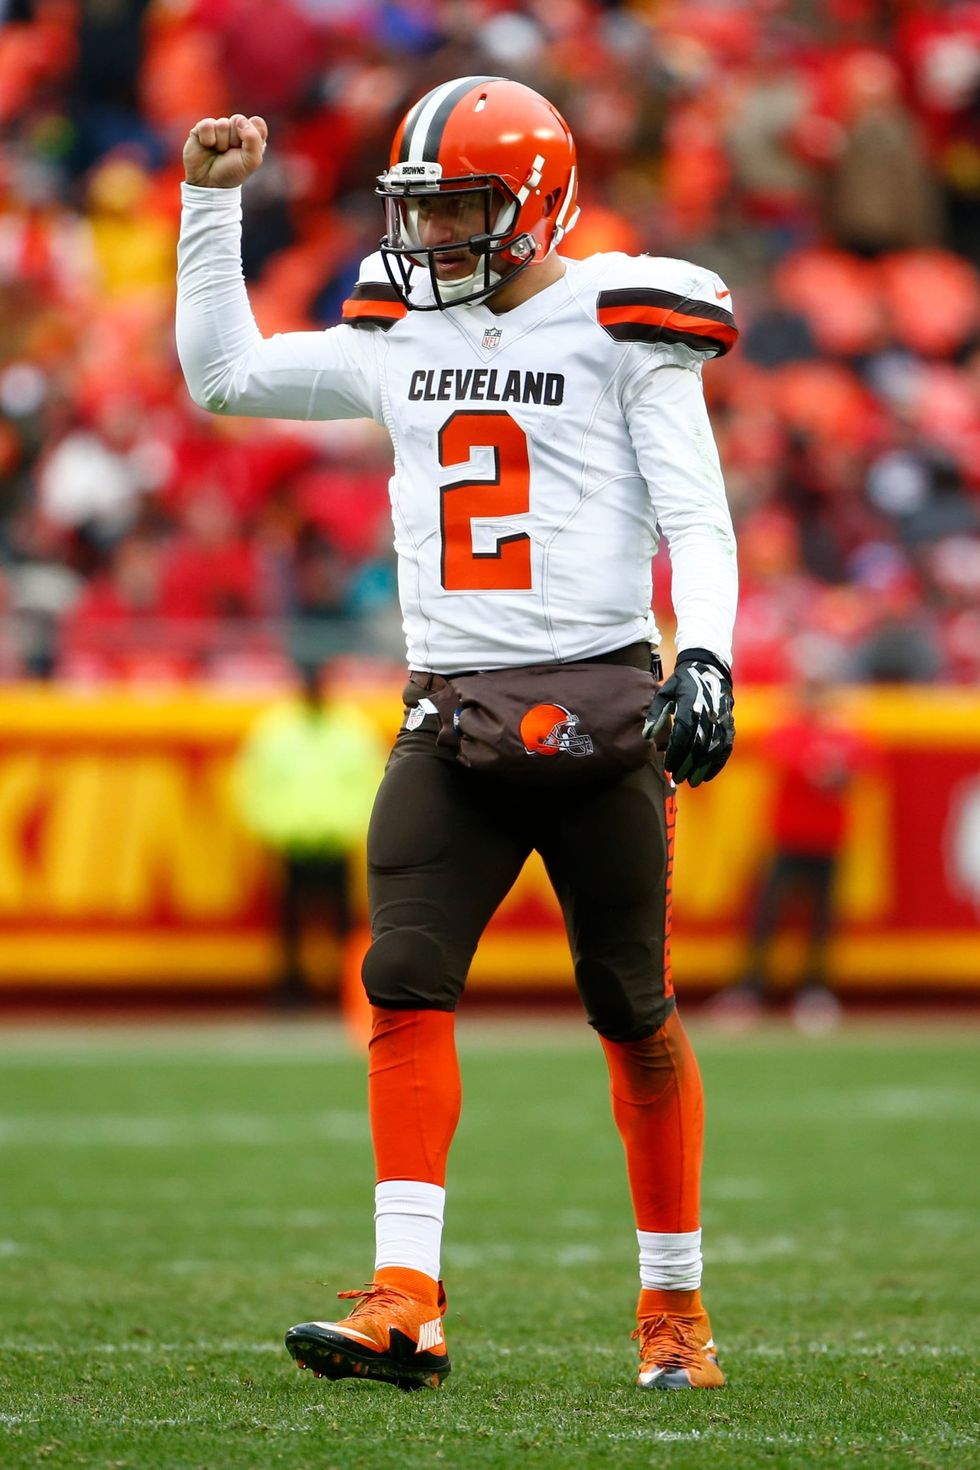 Johnny Manziel has a great opportunity to rebuild his image in the Canadian Football League - if he takes it seriously